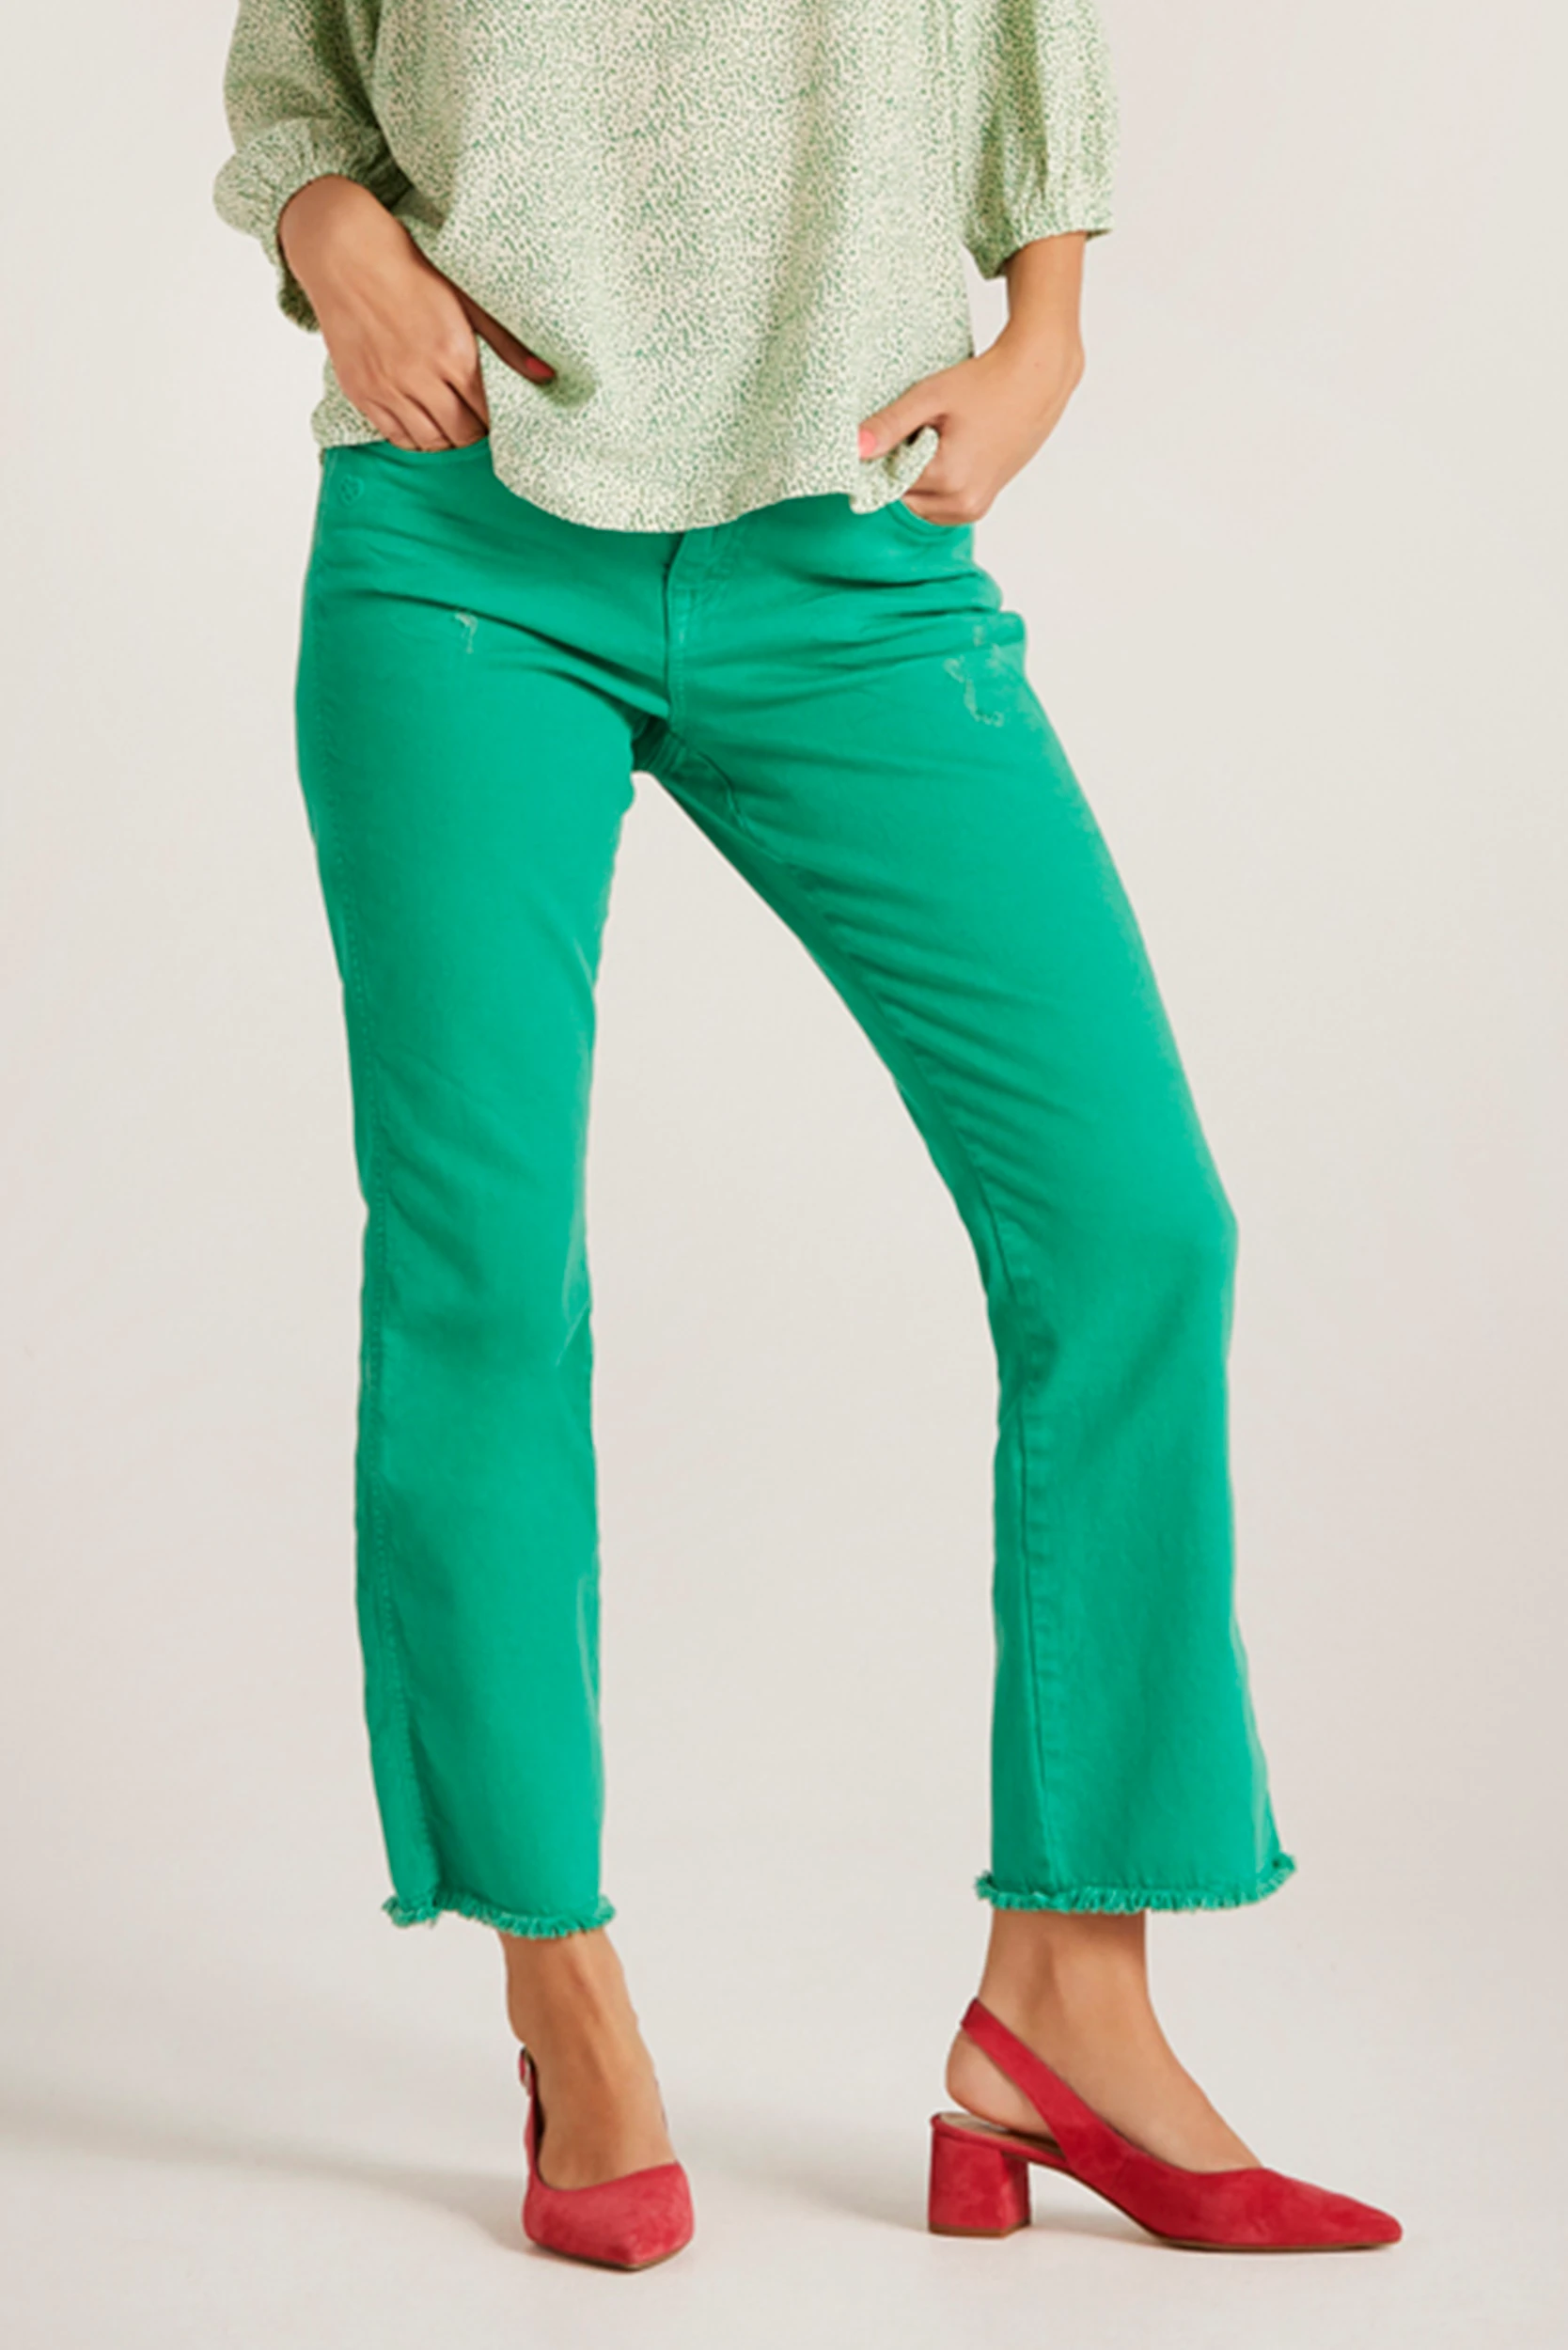 Pants and trousers for women - Save up to 50% - Buy online here